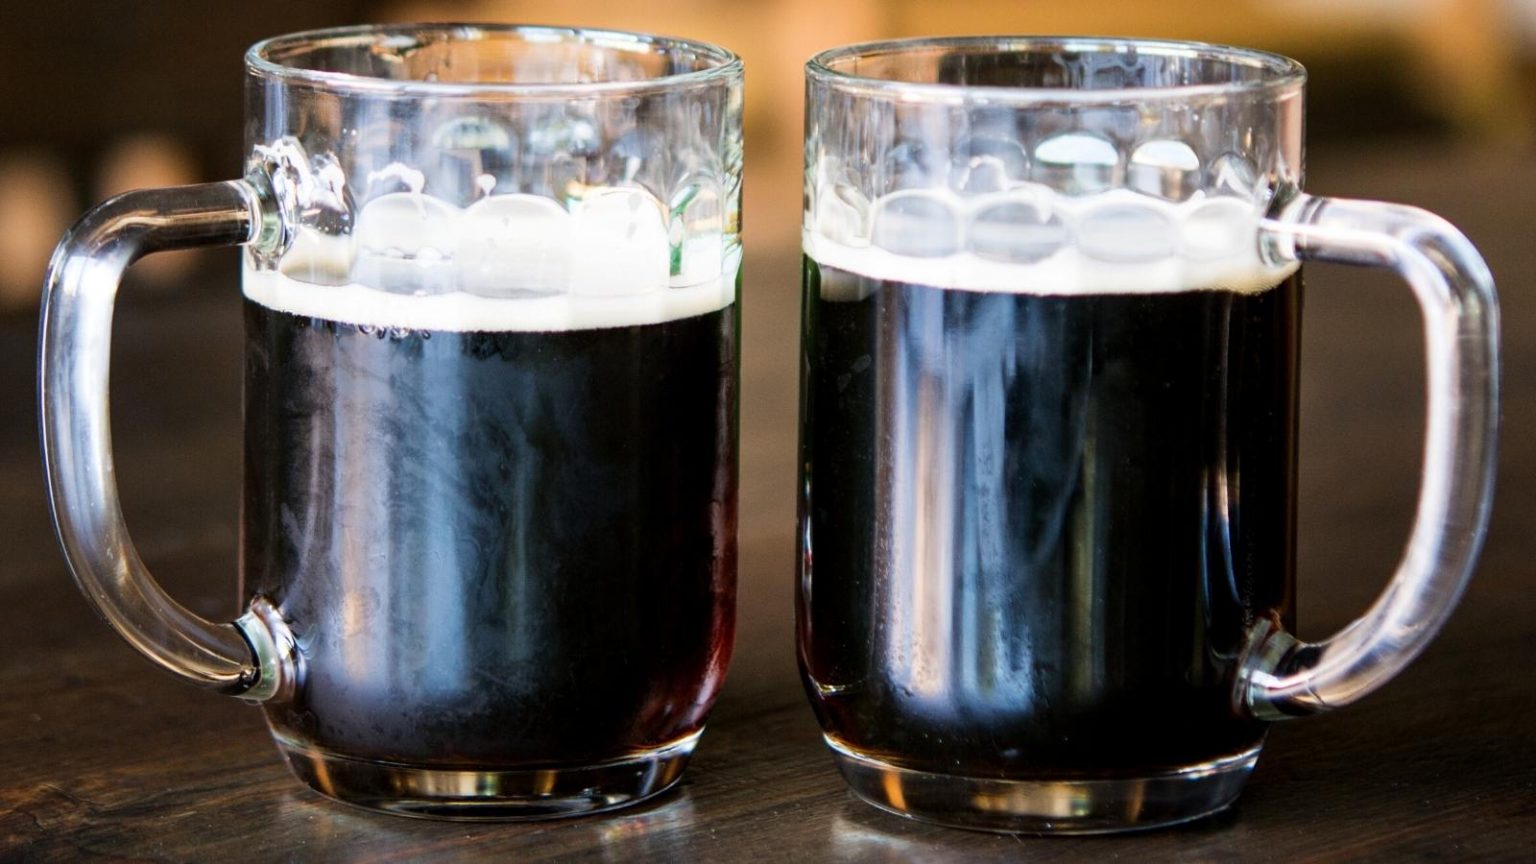 Best Dark Beer Top Rated Choices for Dark Brew Lovers